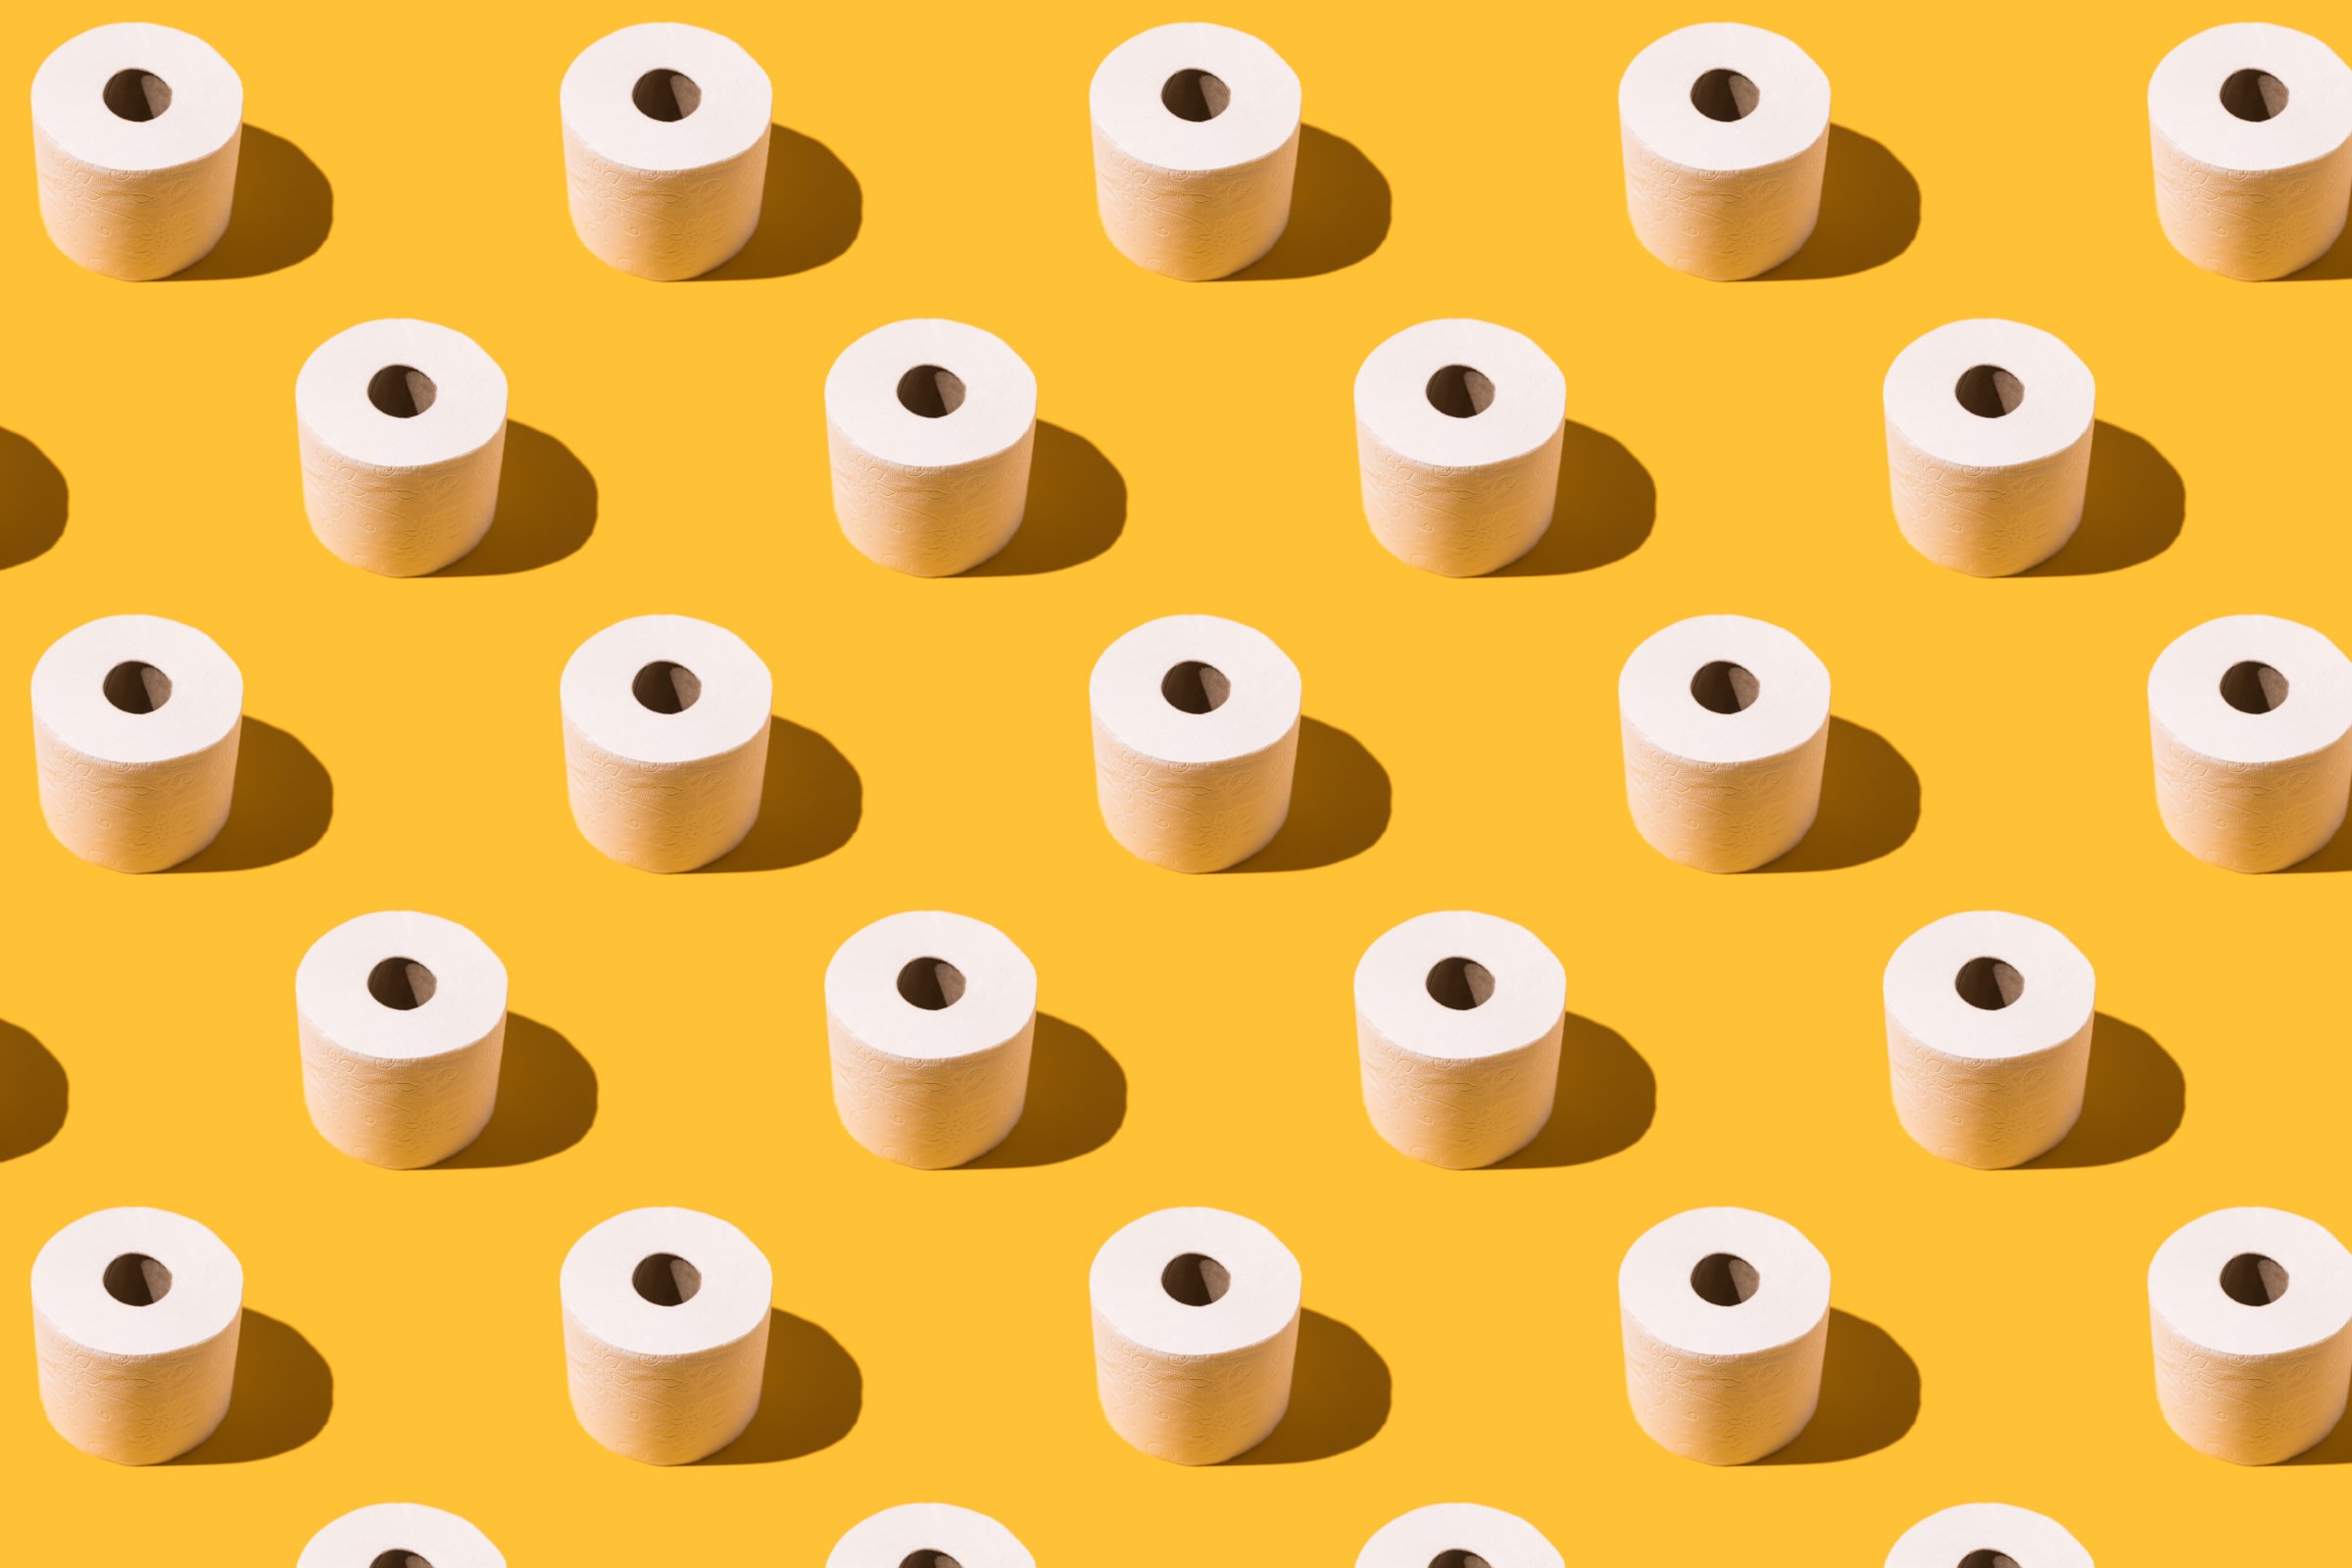 Pattern of white toilet paper rolls on yellow background. Concept of going to the bathroom, cleaning and pooping and peeing.